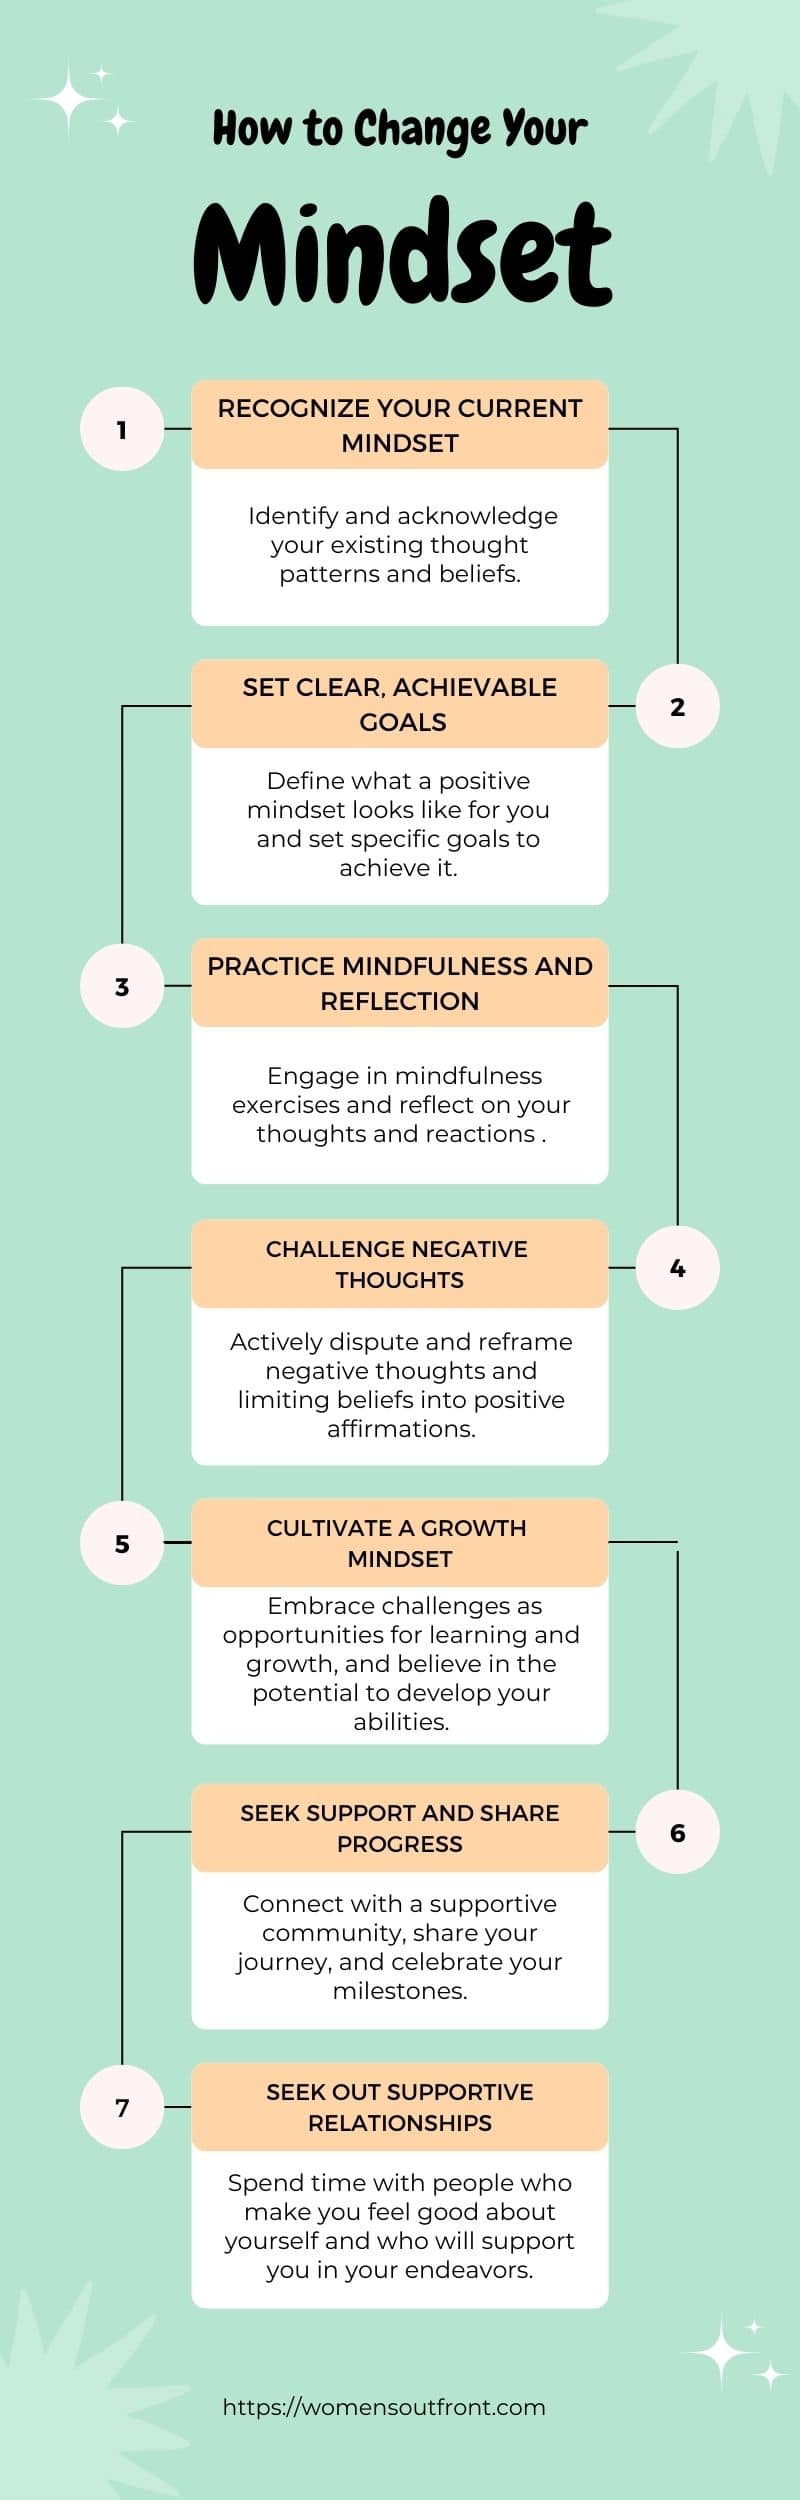 How to change your mindset infographic